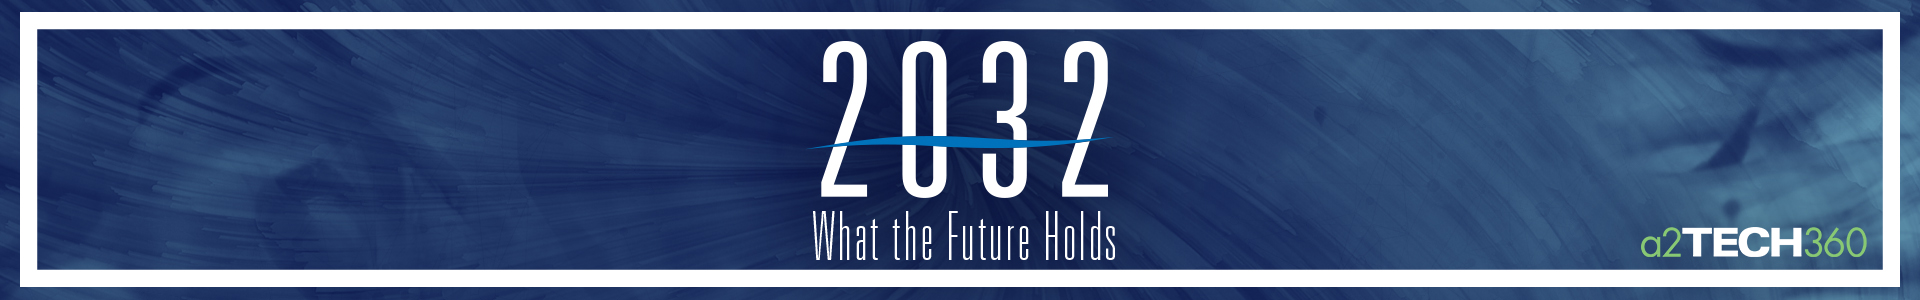 2032: What the Future Holds - October 12, 2022